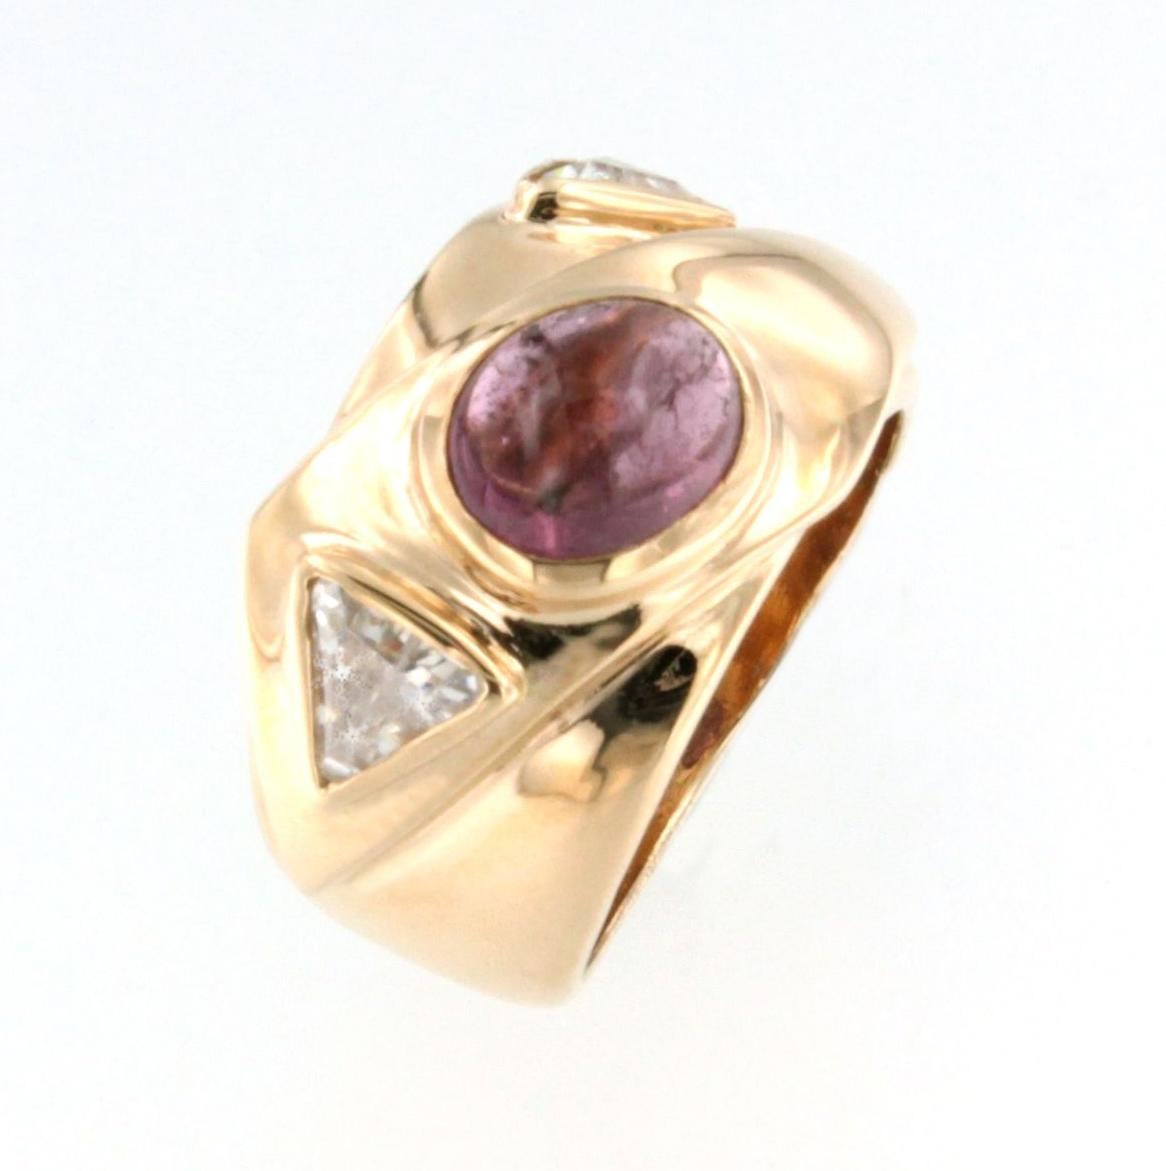 Trillion Cut 14kt Rose Gold with Pink Tourmaline and White Triangular Swarovski Stone Ring For Sale